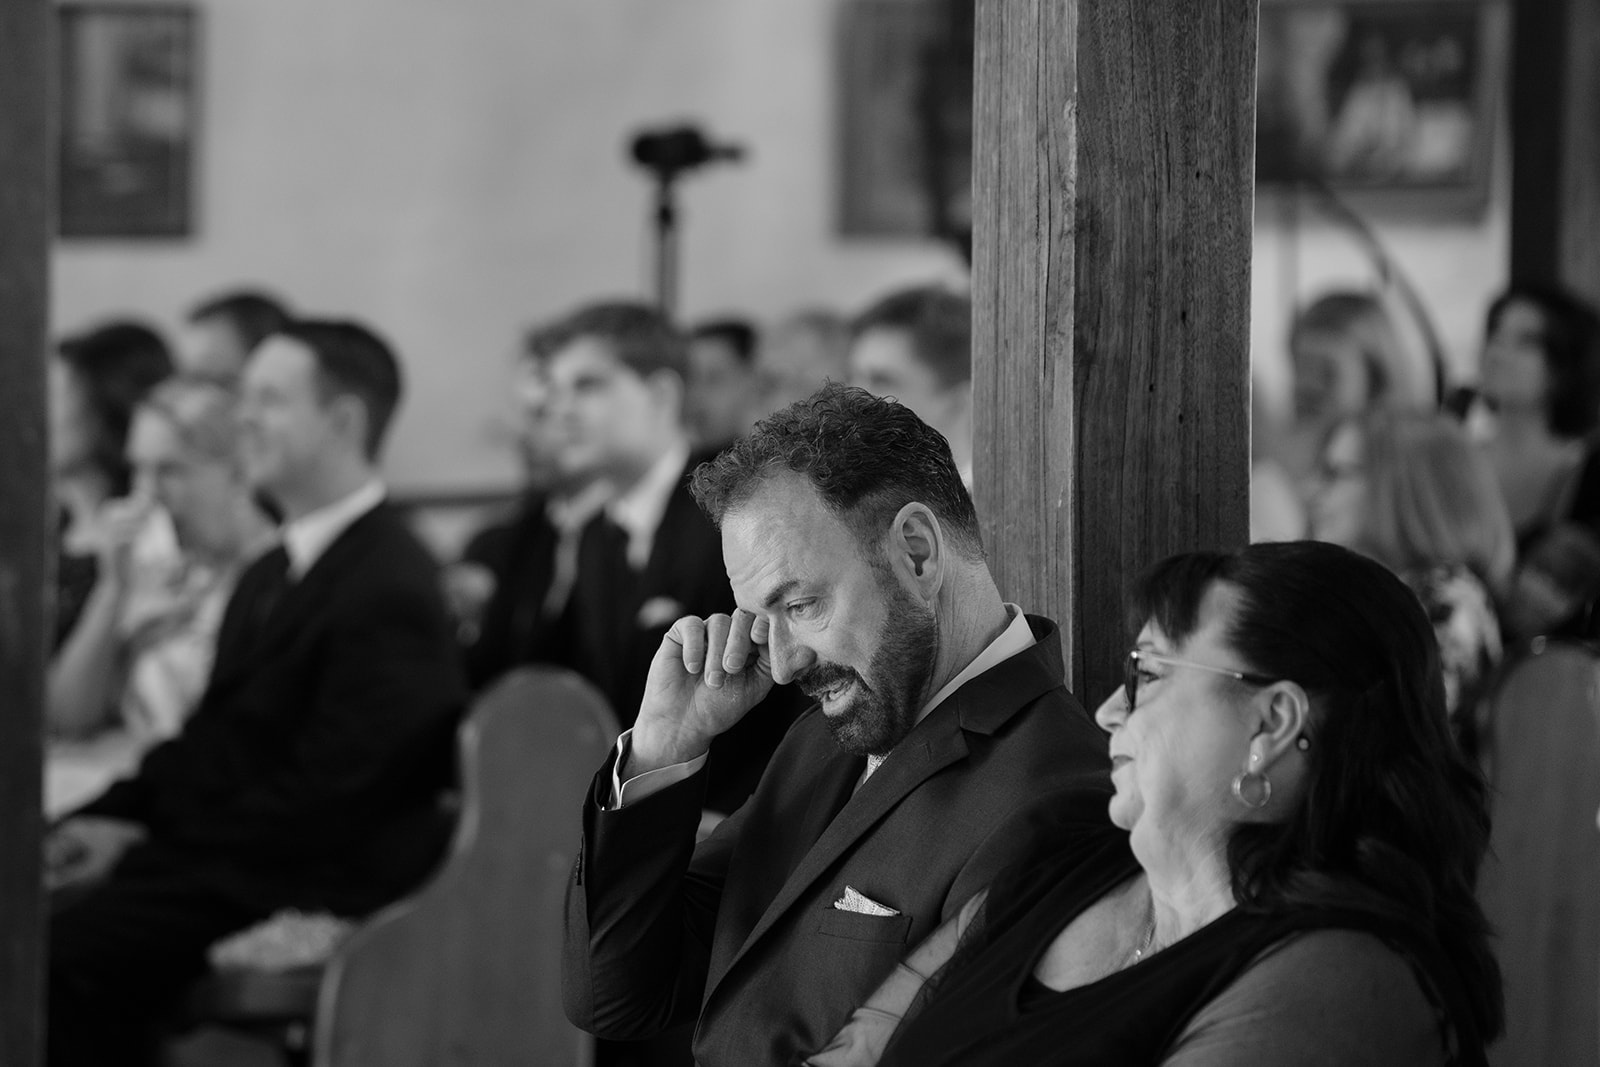 Father's touching reaction to daughter's vows as he wipes tears away.